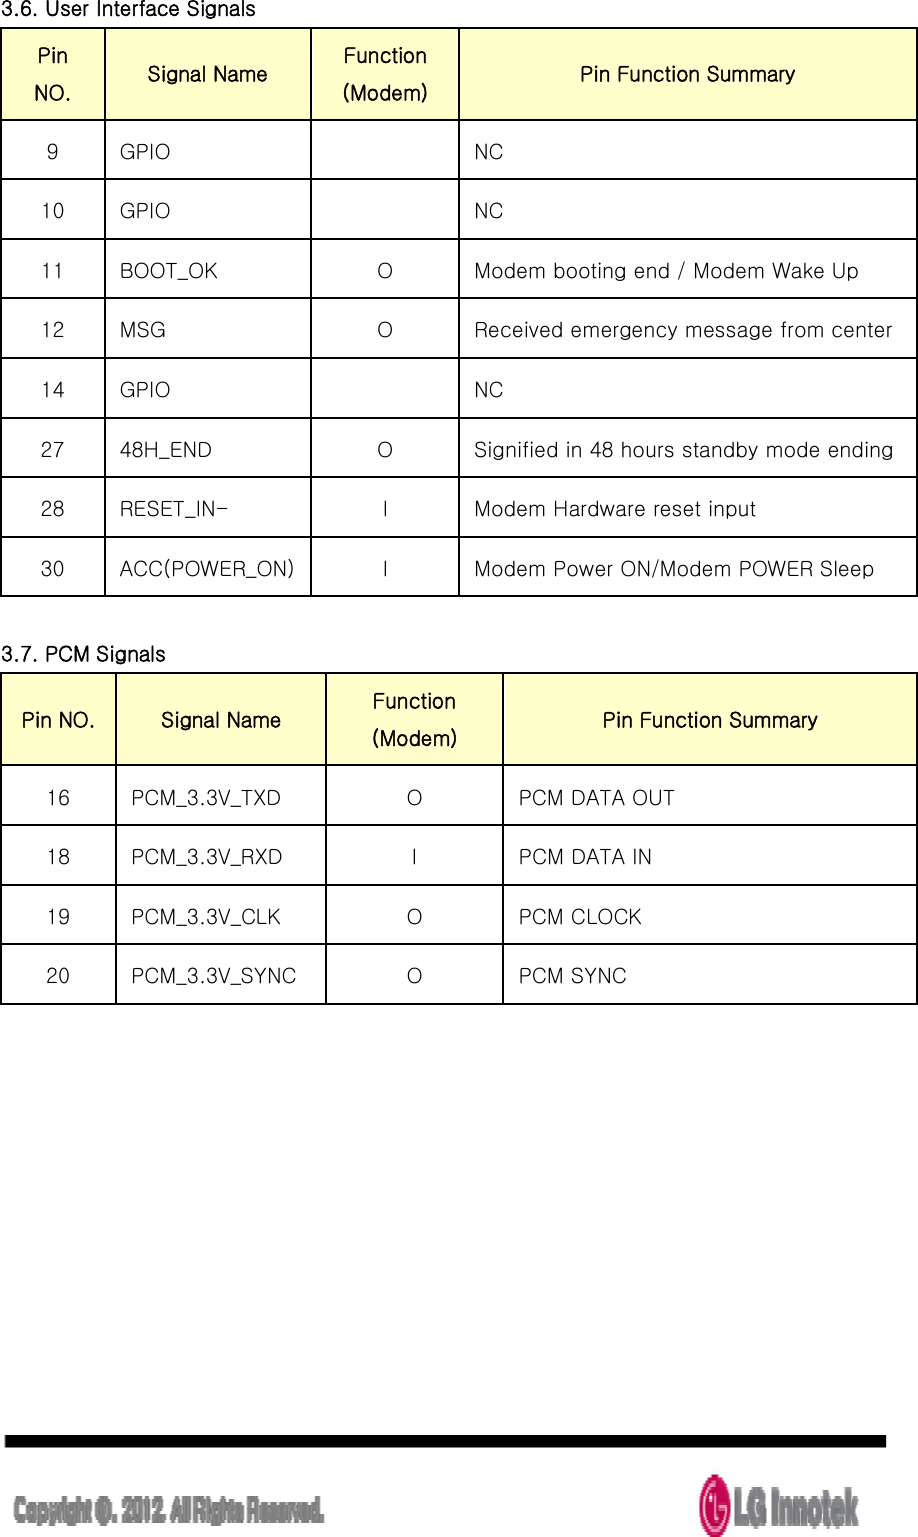  3.6. User Interface Signals Pin NO.   Signal Name Function (Modem) Pin Function Summary 9  GPIO    NC 10  GPIO    NC   11  BOOT_OK  O  Modem booting end / Modem Wake Up   12  MSG  O  Received emergency message from center 14  GPIO    NC 27  48H_END  O  Signified in 48 hours standby mode ending 28  RESET_IN-  I  Modem Hardware reset input 30  ACC(POWER_ON) I  Modem Power ON/Modem POWER Sleep  3.7. PCM Signals Pin NO.  Signal Name Function  (Modem) Pin Function Summary 16 PCM_3.3V_TXD    O PCM DATA OUT 18 PCM_3.3V_RXD I PCM DATA IN  19 PCM_3.3V_CLK O PCM CLOCK 20 PCM_3.3V_SYNC O PCM SYNC 